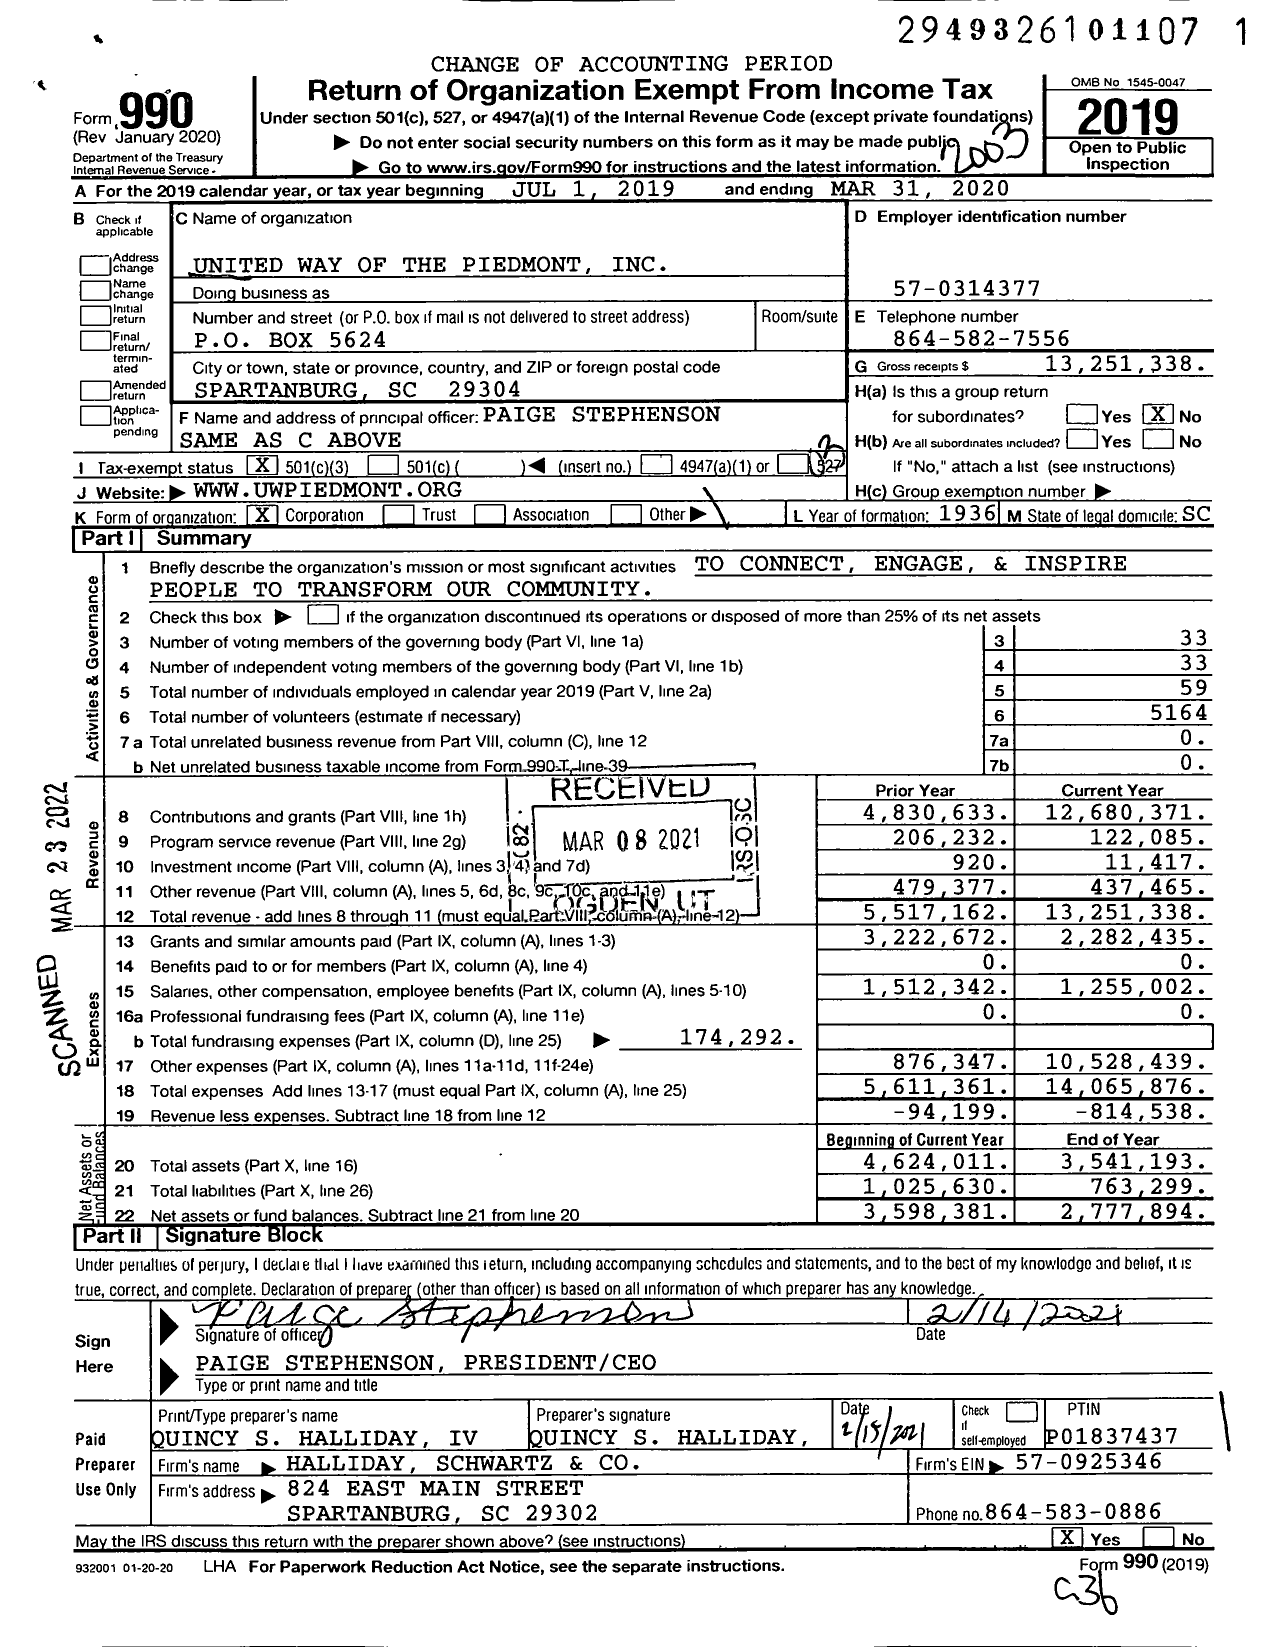 Image of first page of 2019 Form 990 for United Way of the Piedmont